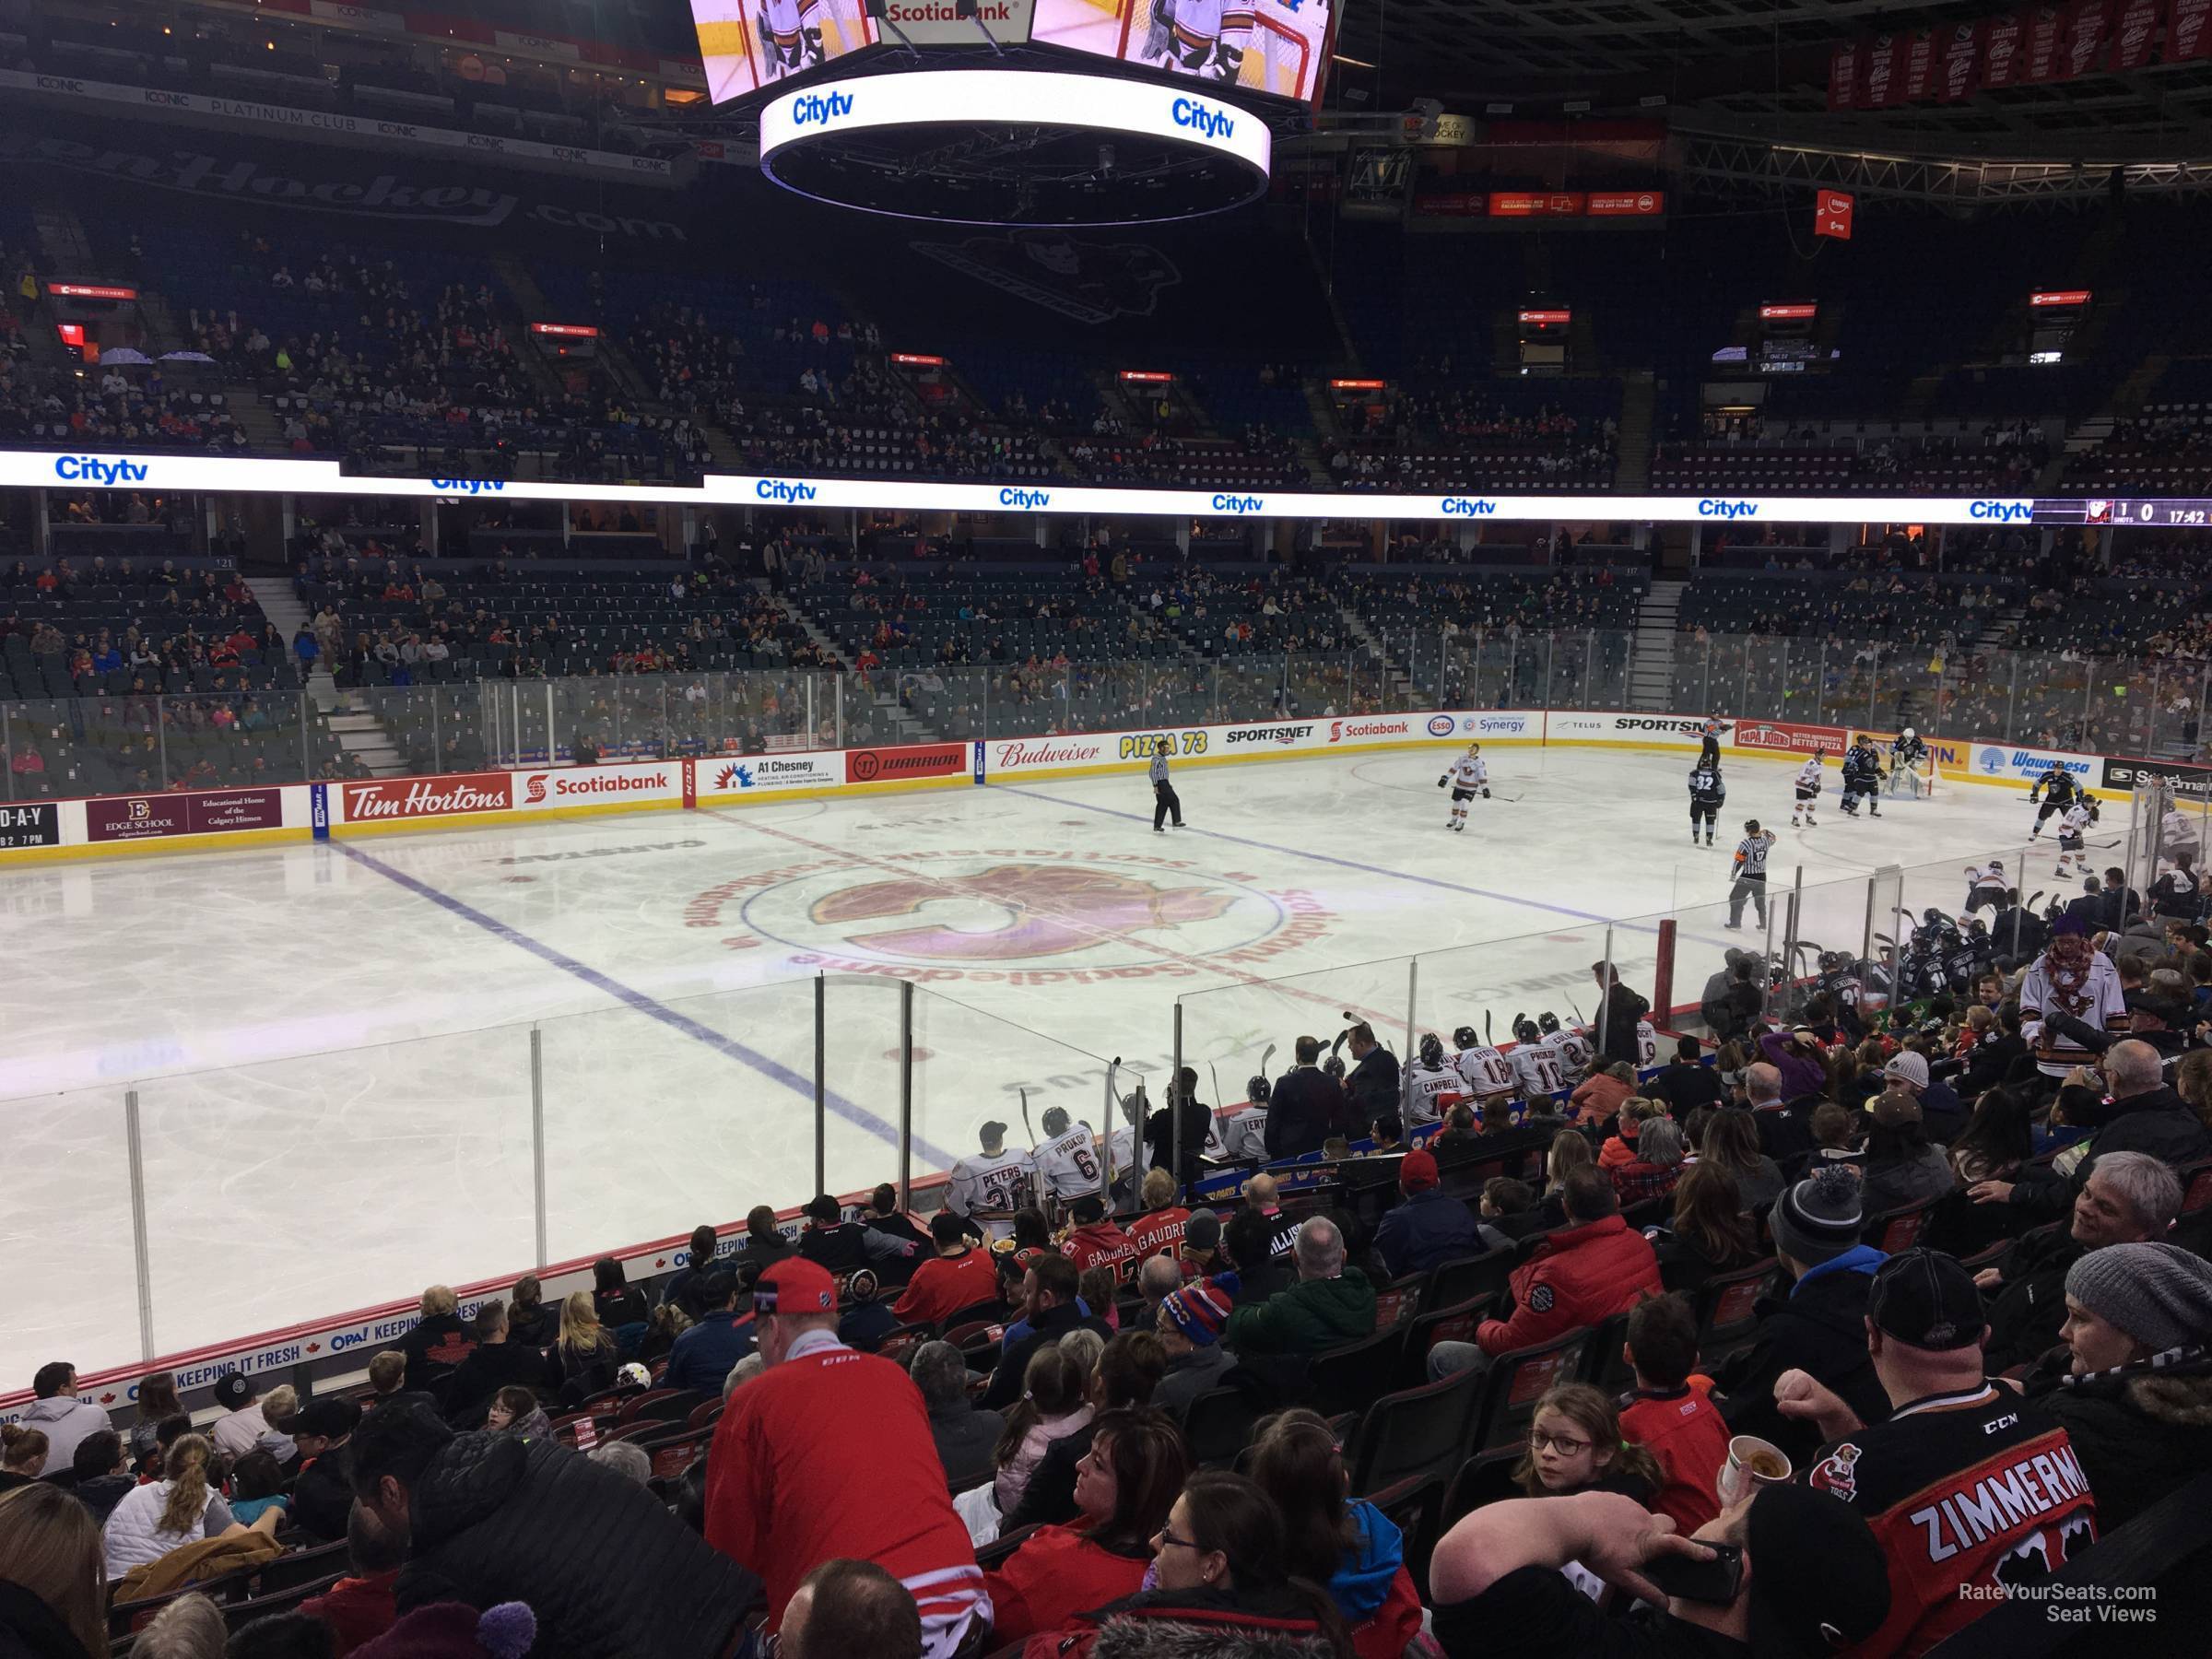 section 108, row 12 seat view  for hockey - scotiabank saddledome